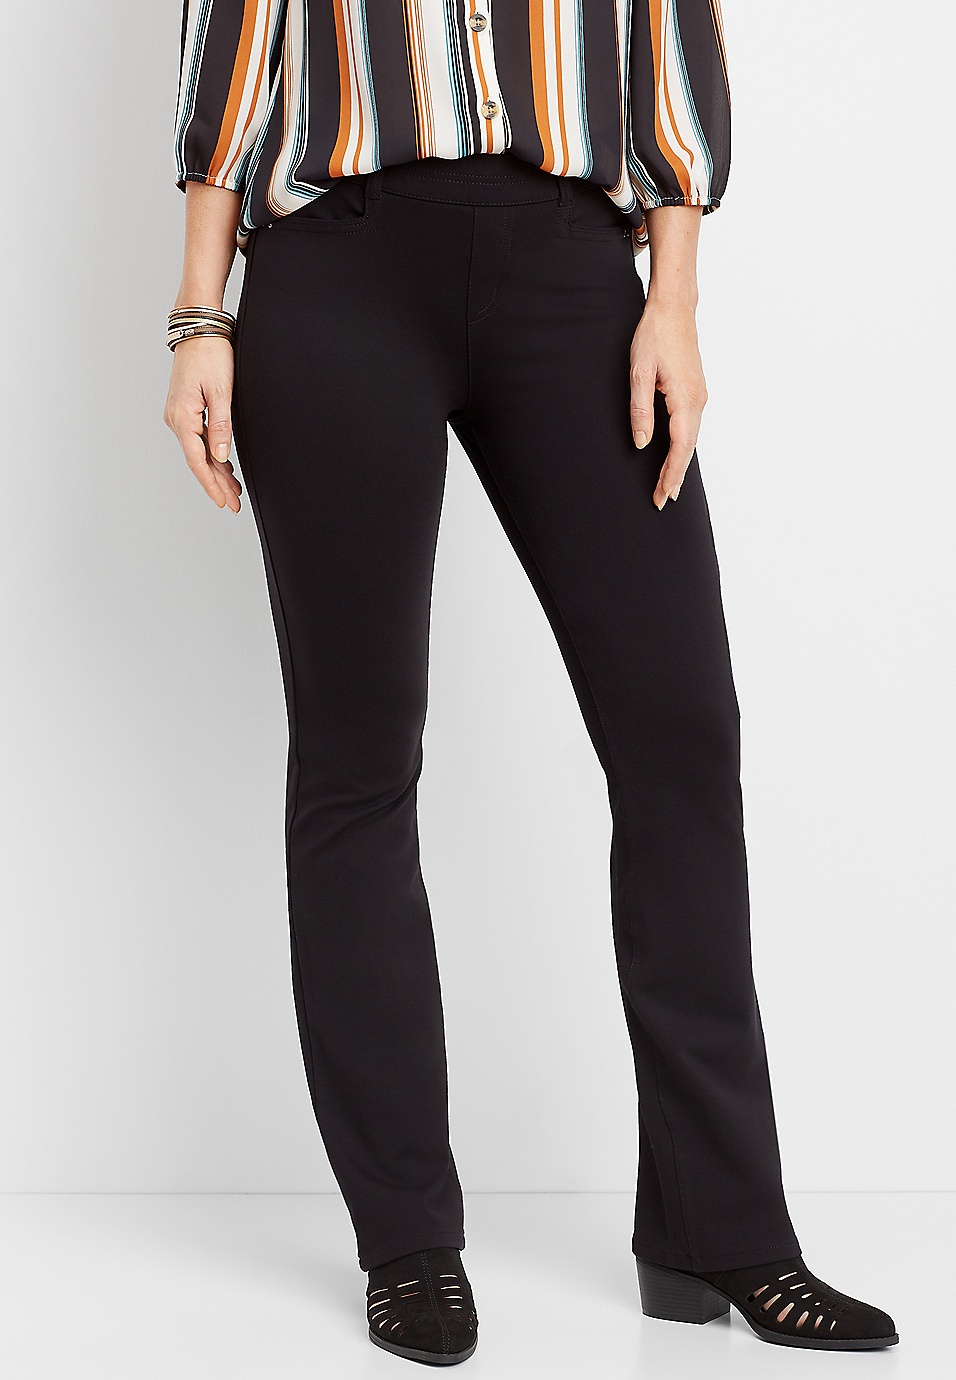 ponte knit stretchy pull on bootcut pant